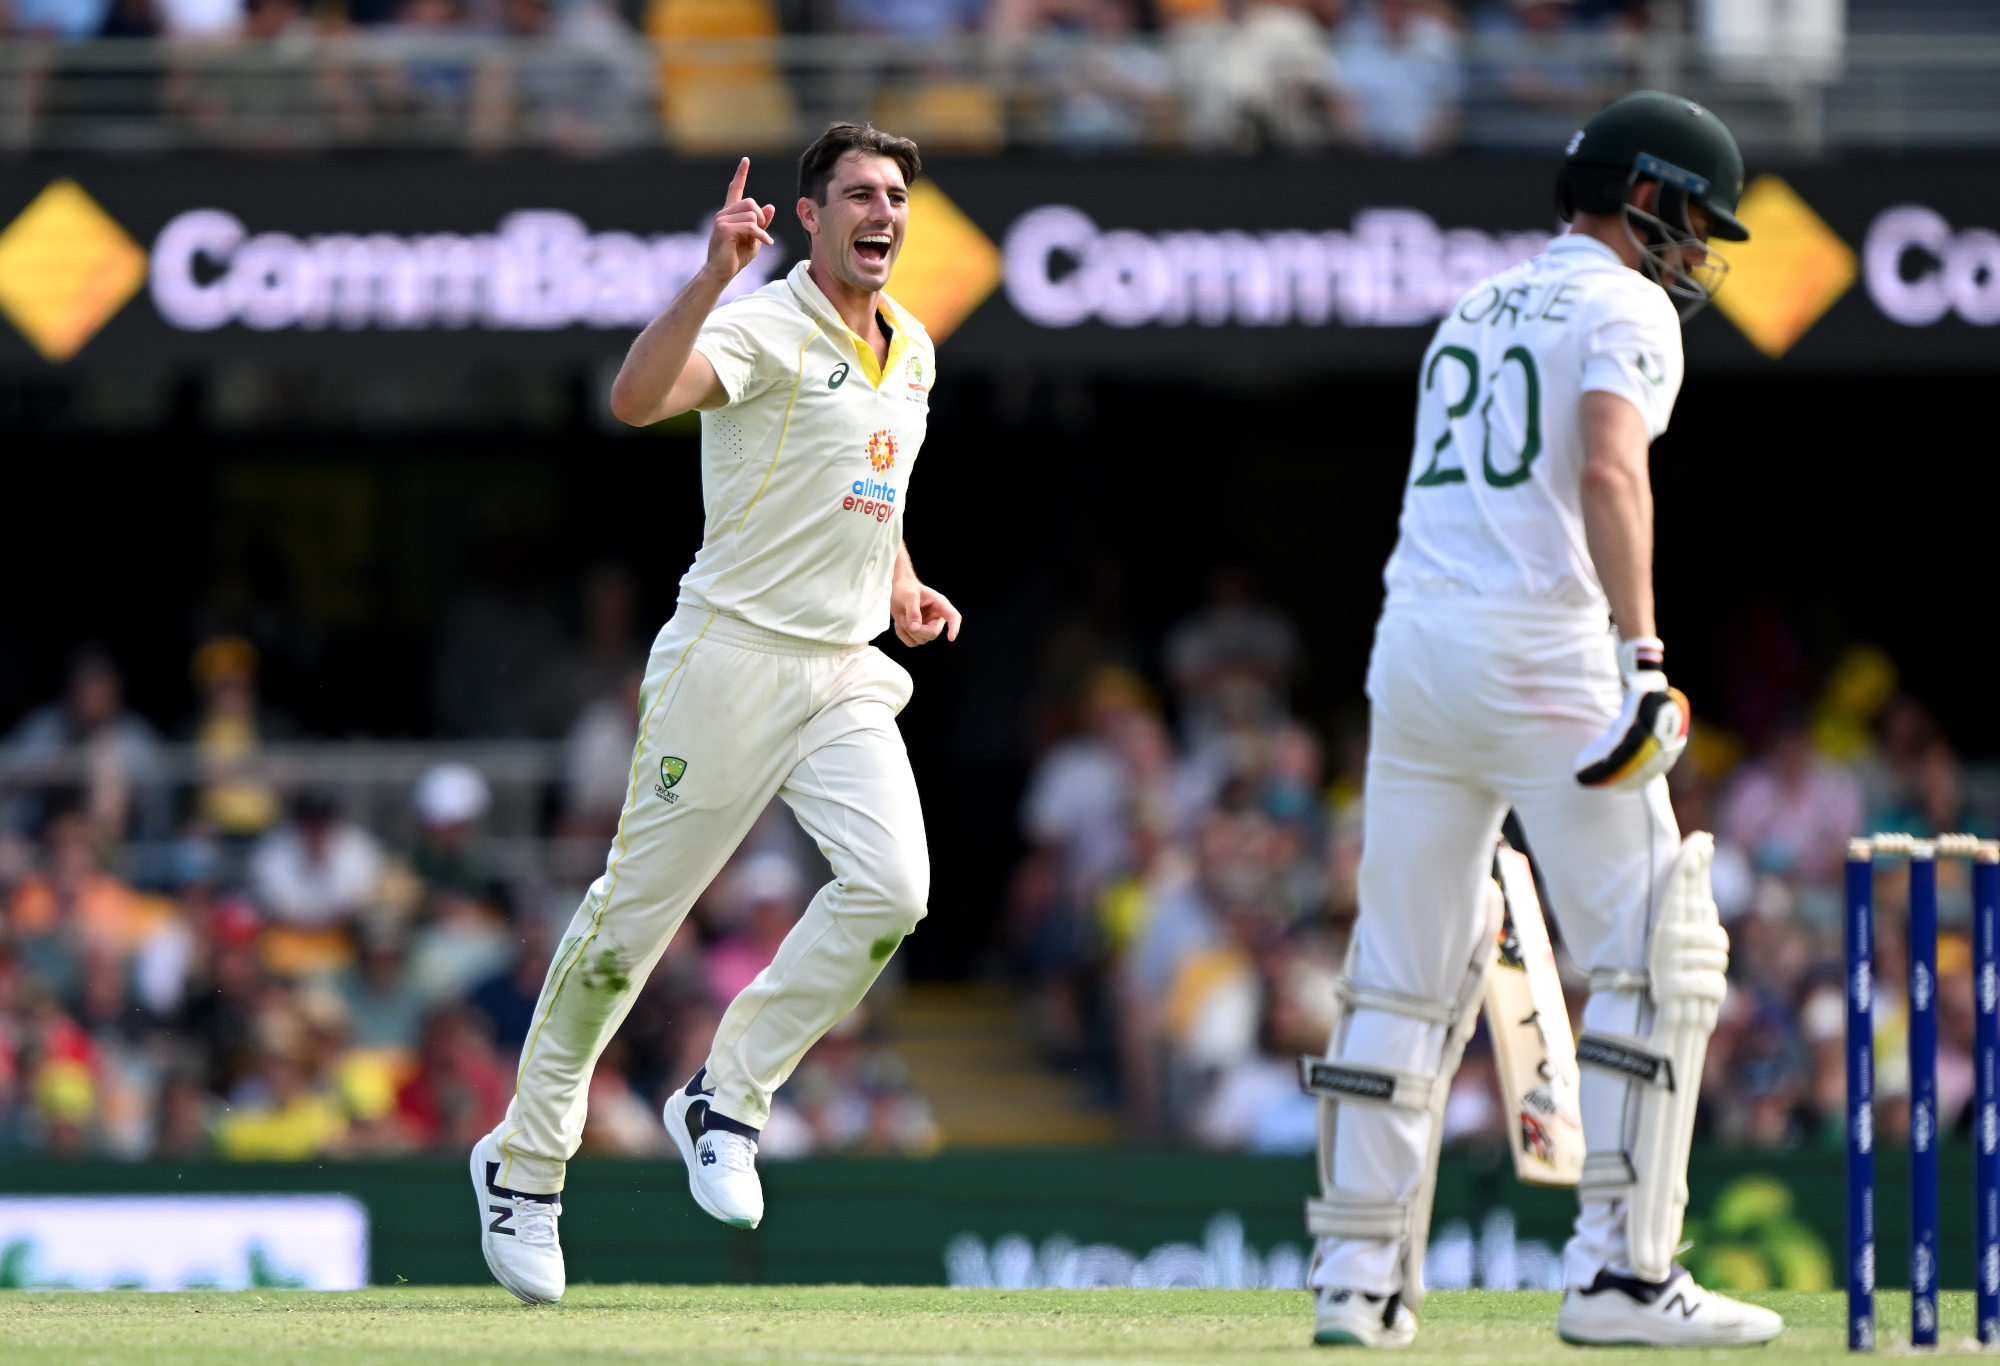 Pat Cummins of Australia celebrates taking the wicket of Anrich Nortje of South Africa.